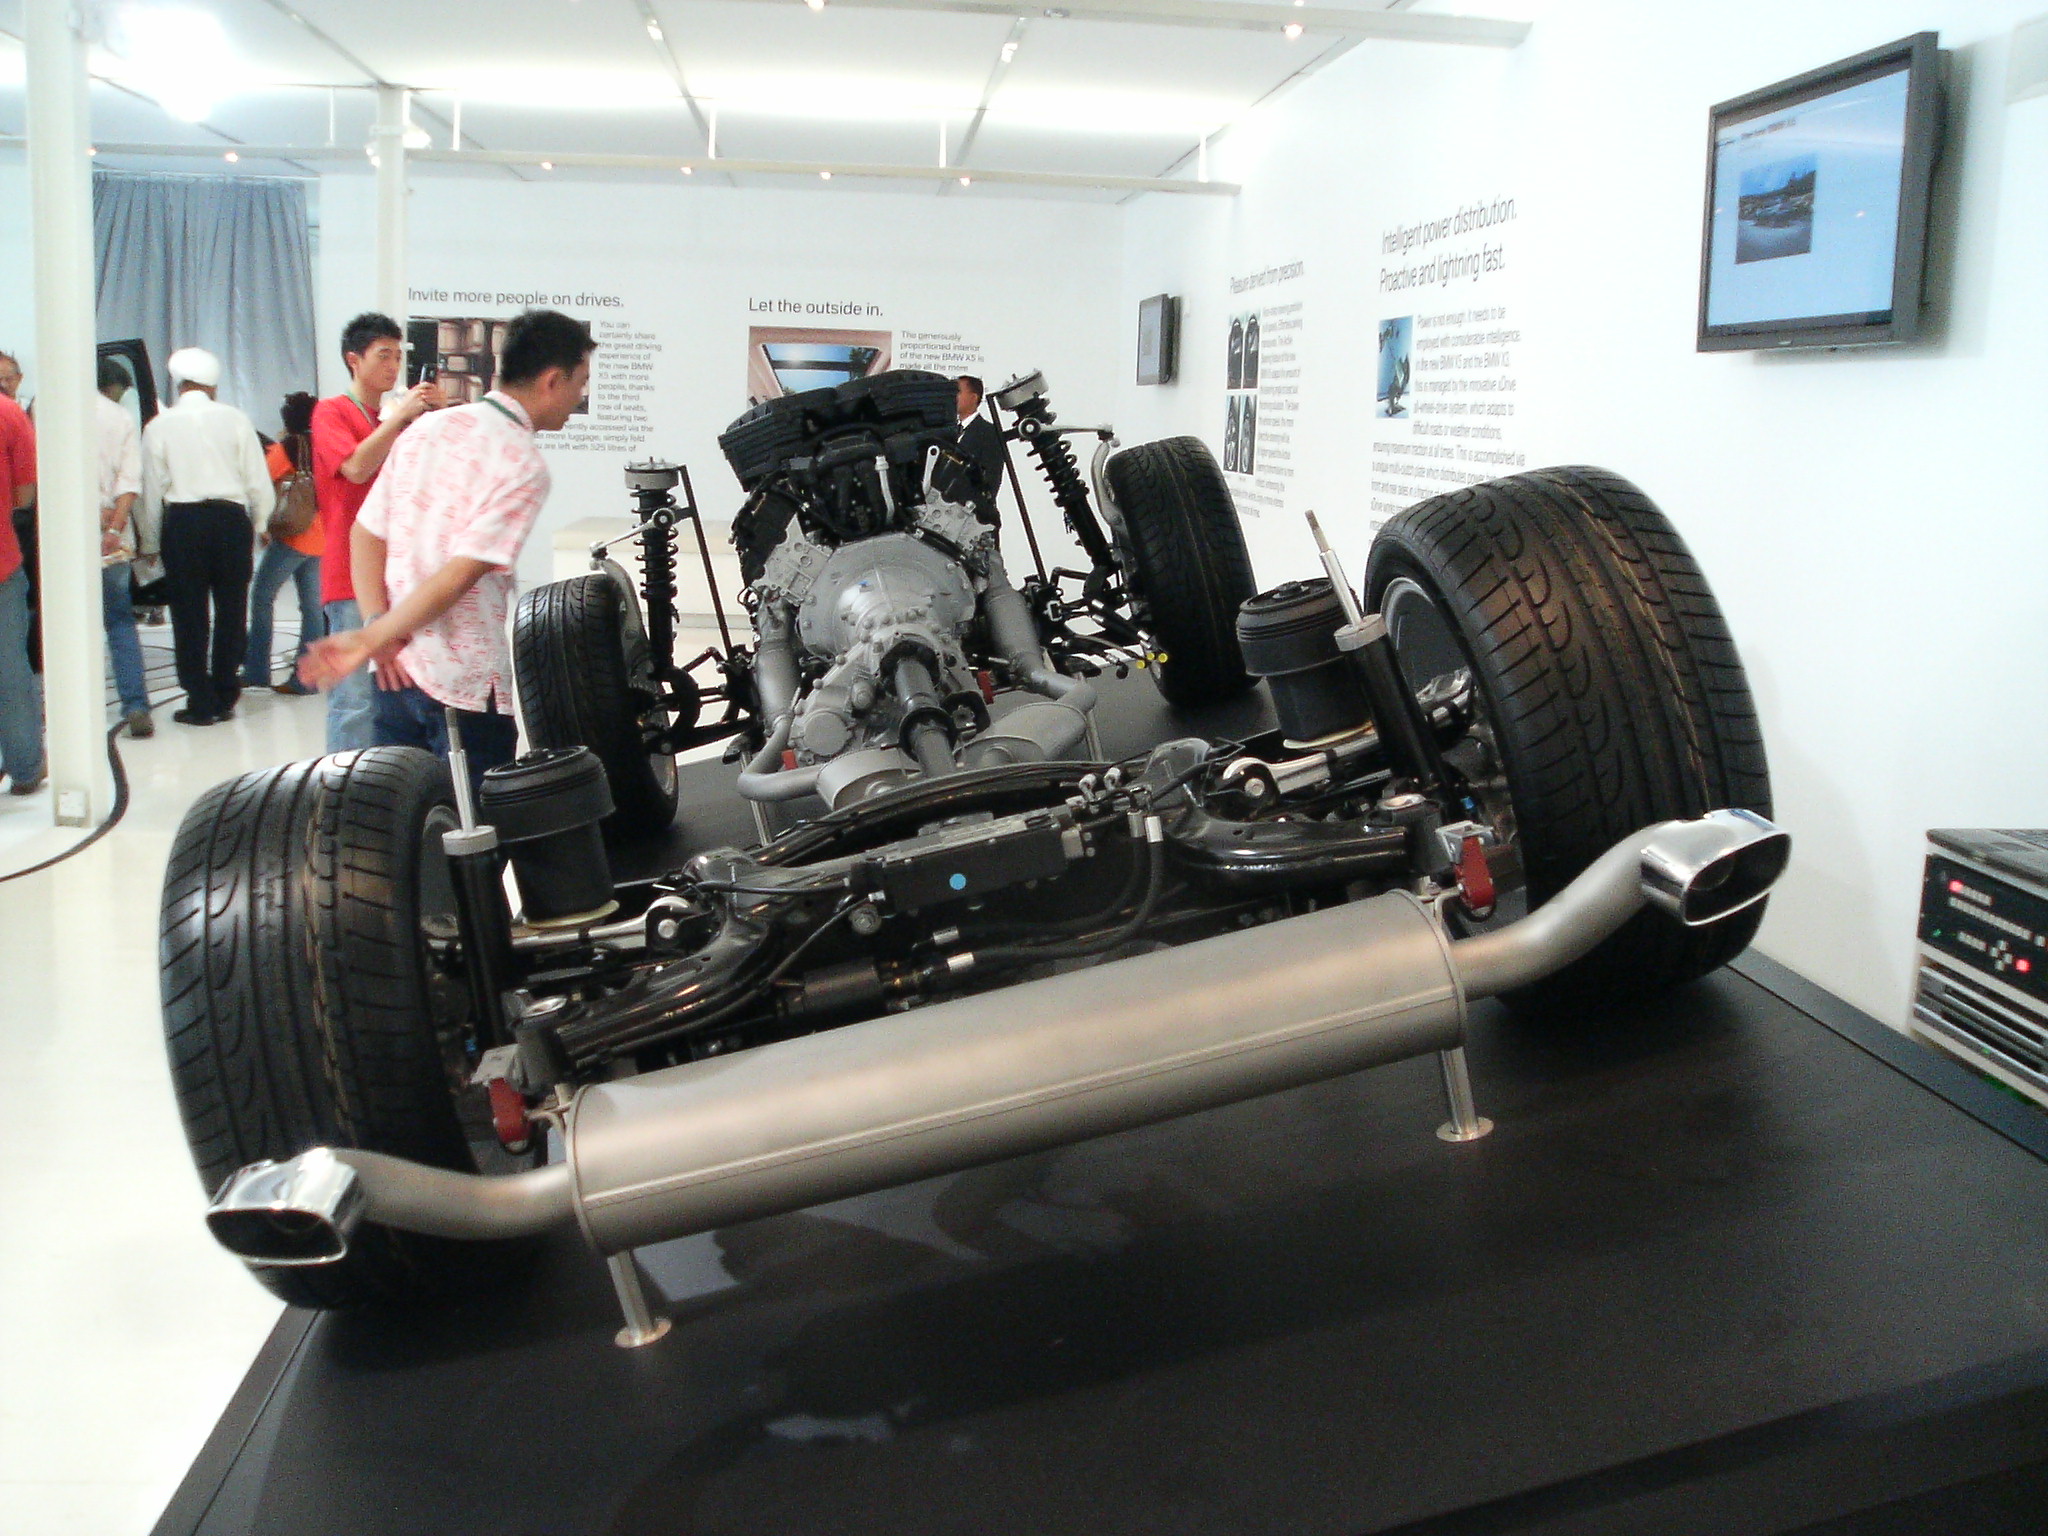 BMW X5 chassis